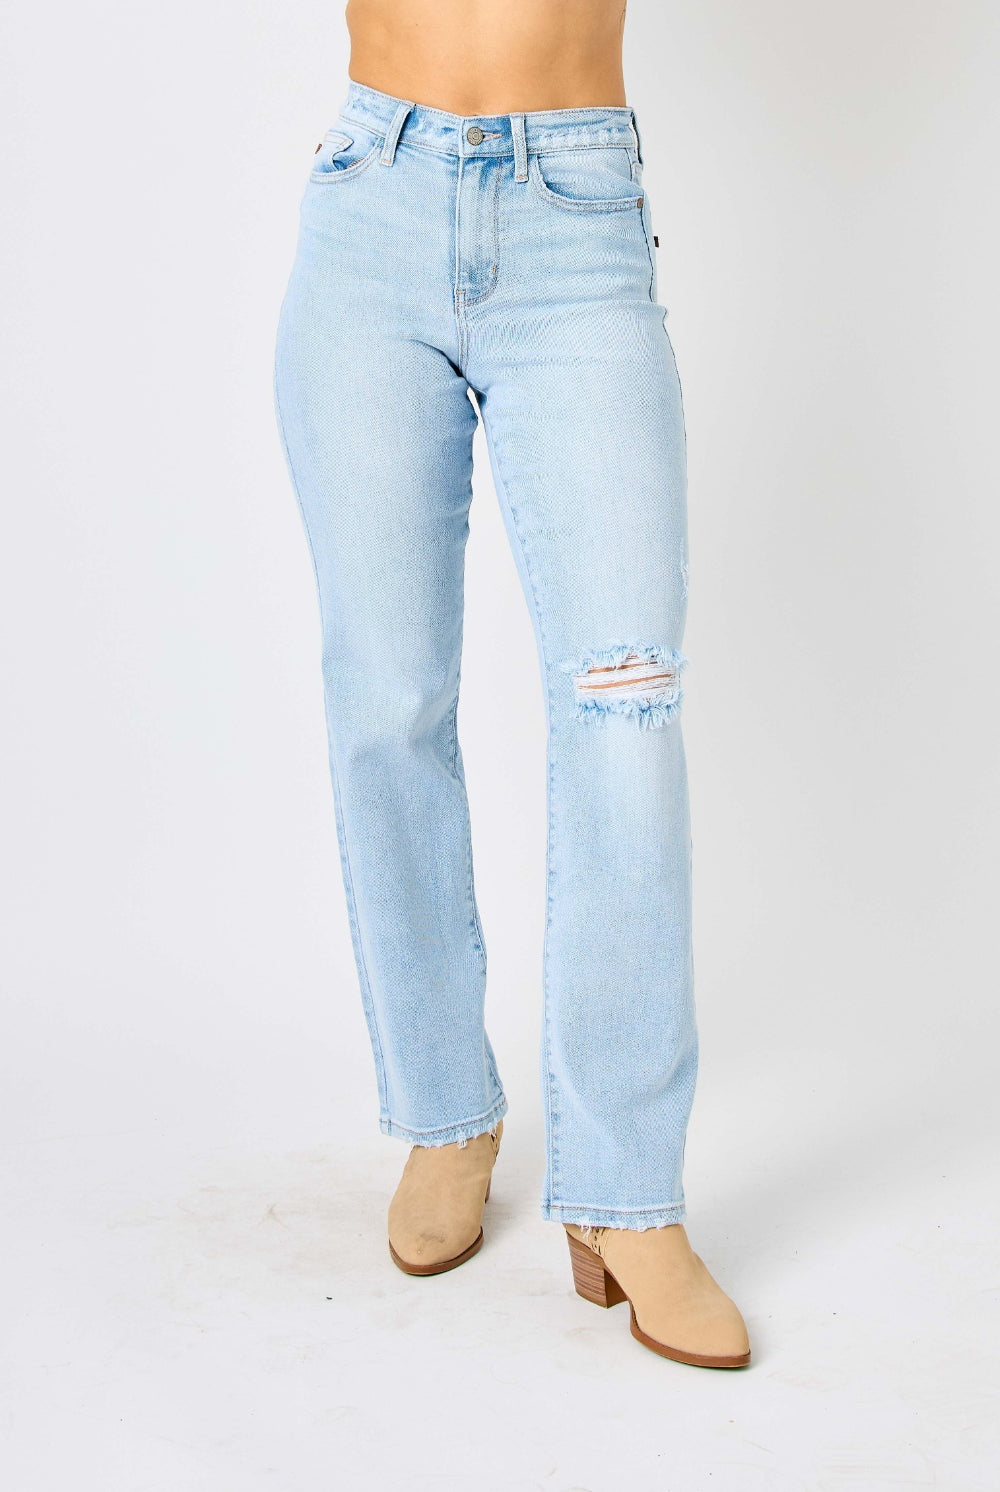 Judy Blue Full Size High Waist Distressed Straight Jeans - GemThreads Boutique Judy Blue Full Size High Waist Distressed Straight Jeans